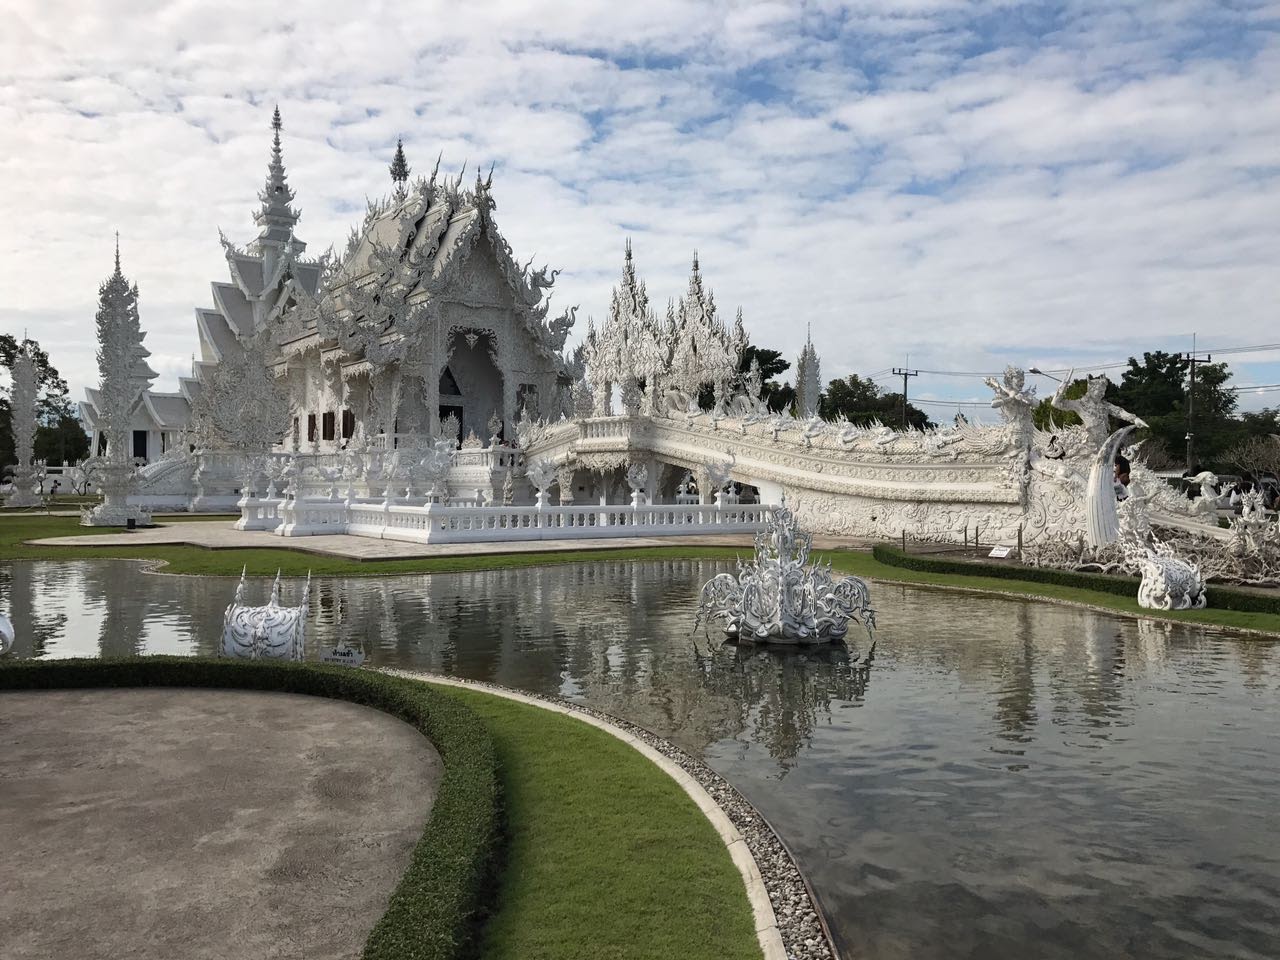 Chiang Rai is a heaven when you want to reconnect with nature